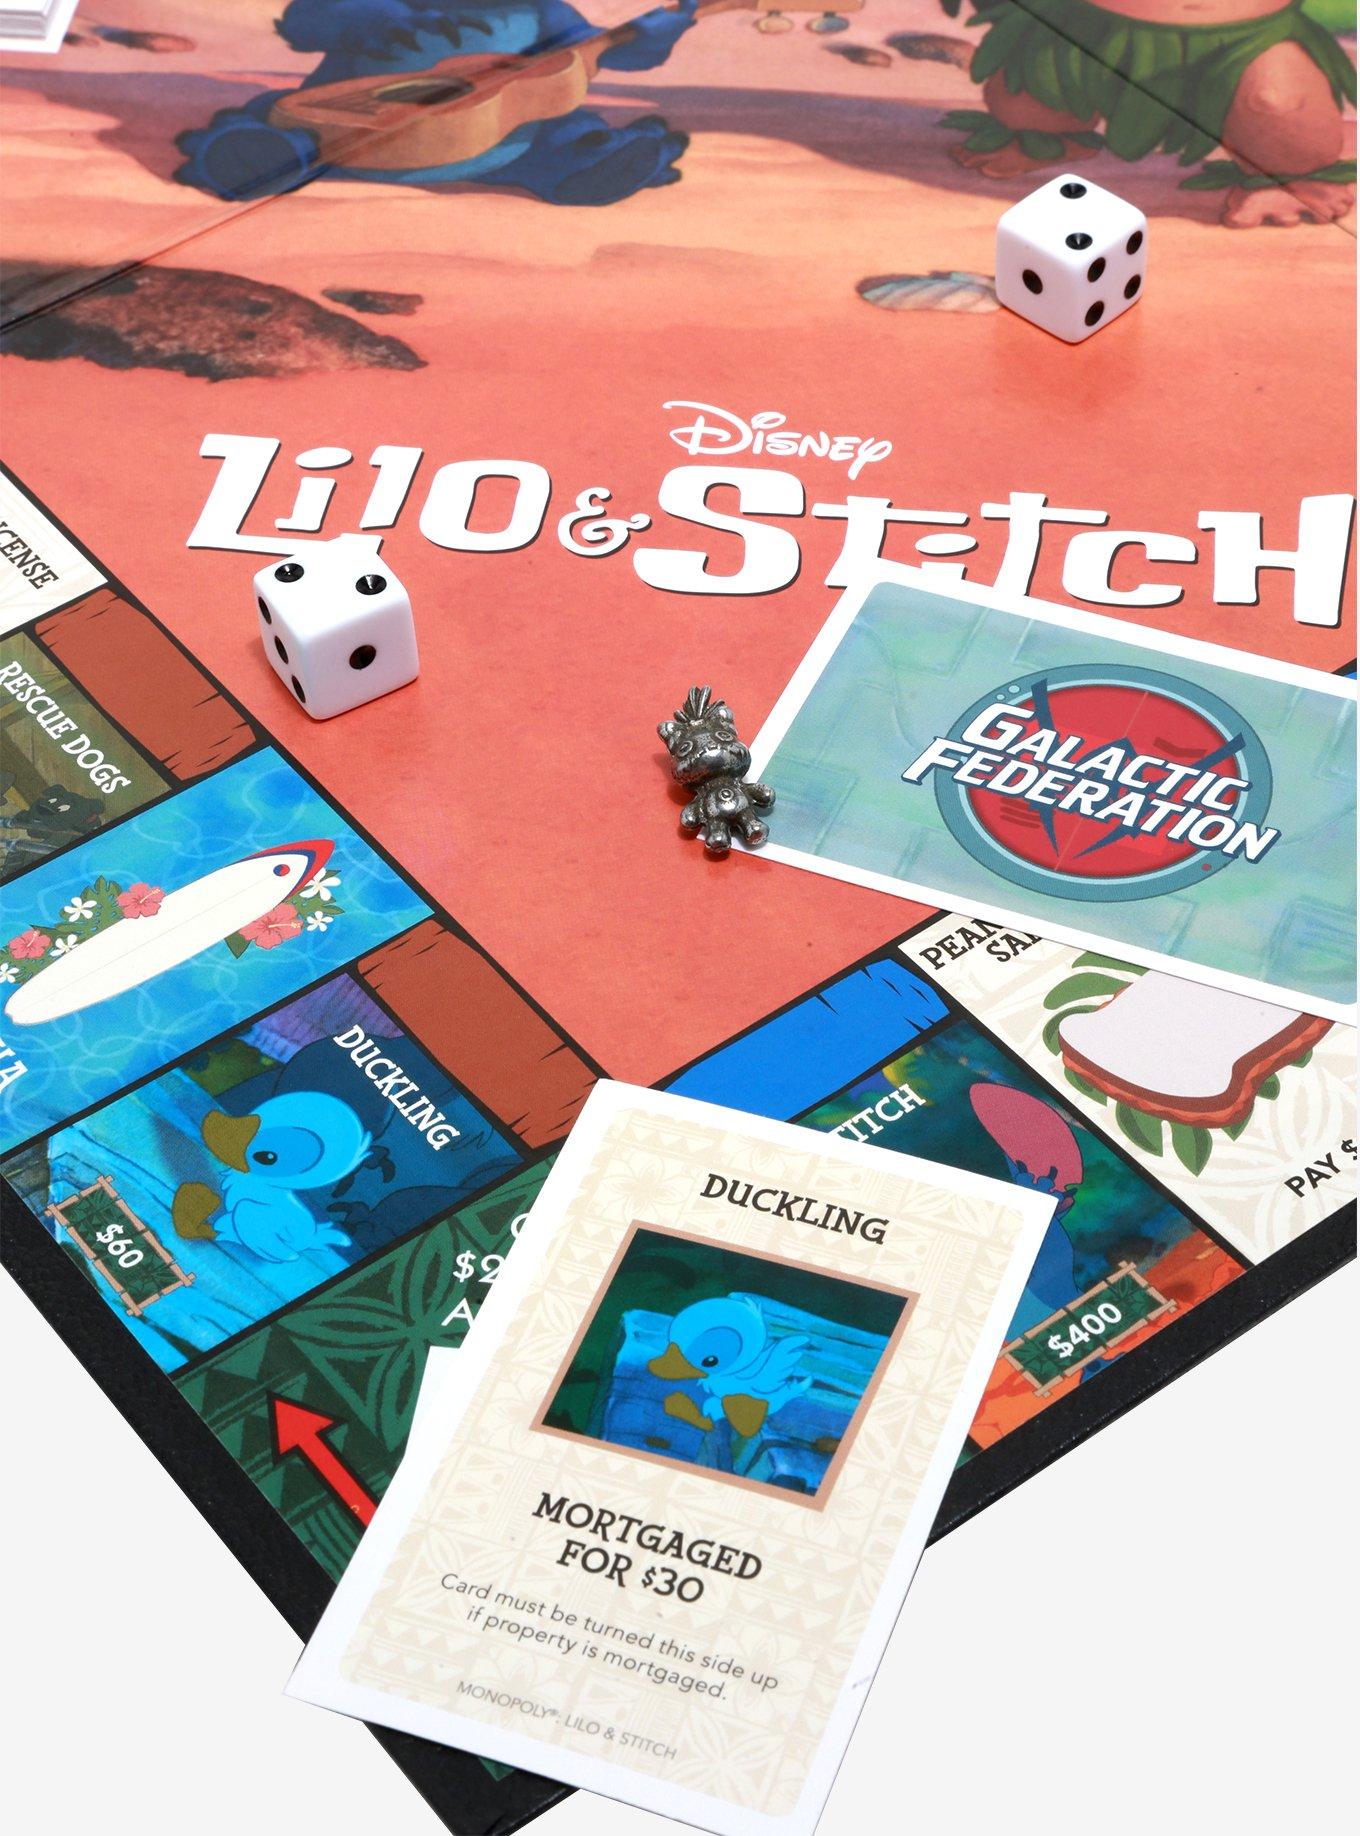 Who in the World Thought 'Lilo & Stitch' Monopoly Was a Good Idea?